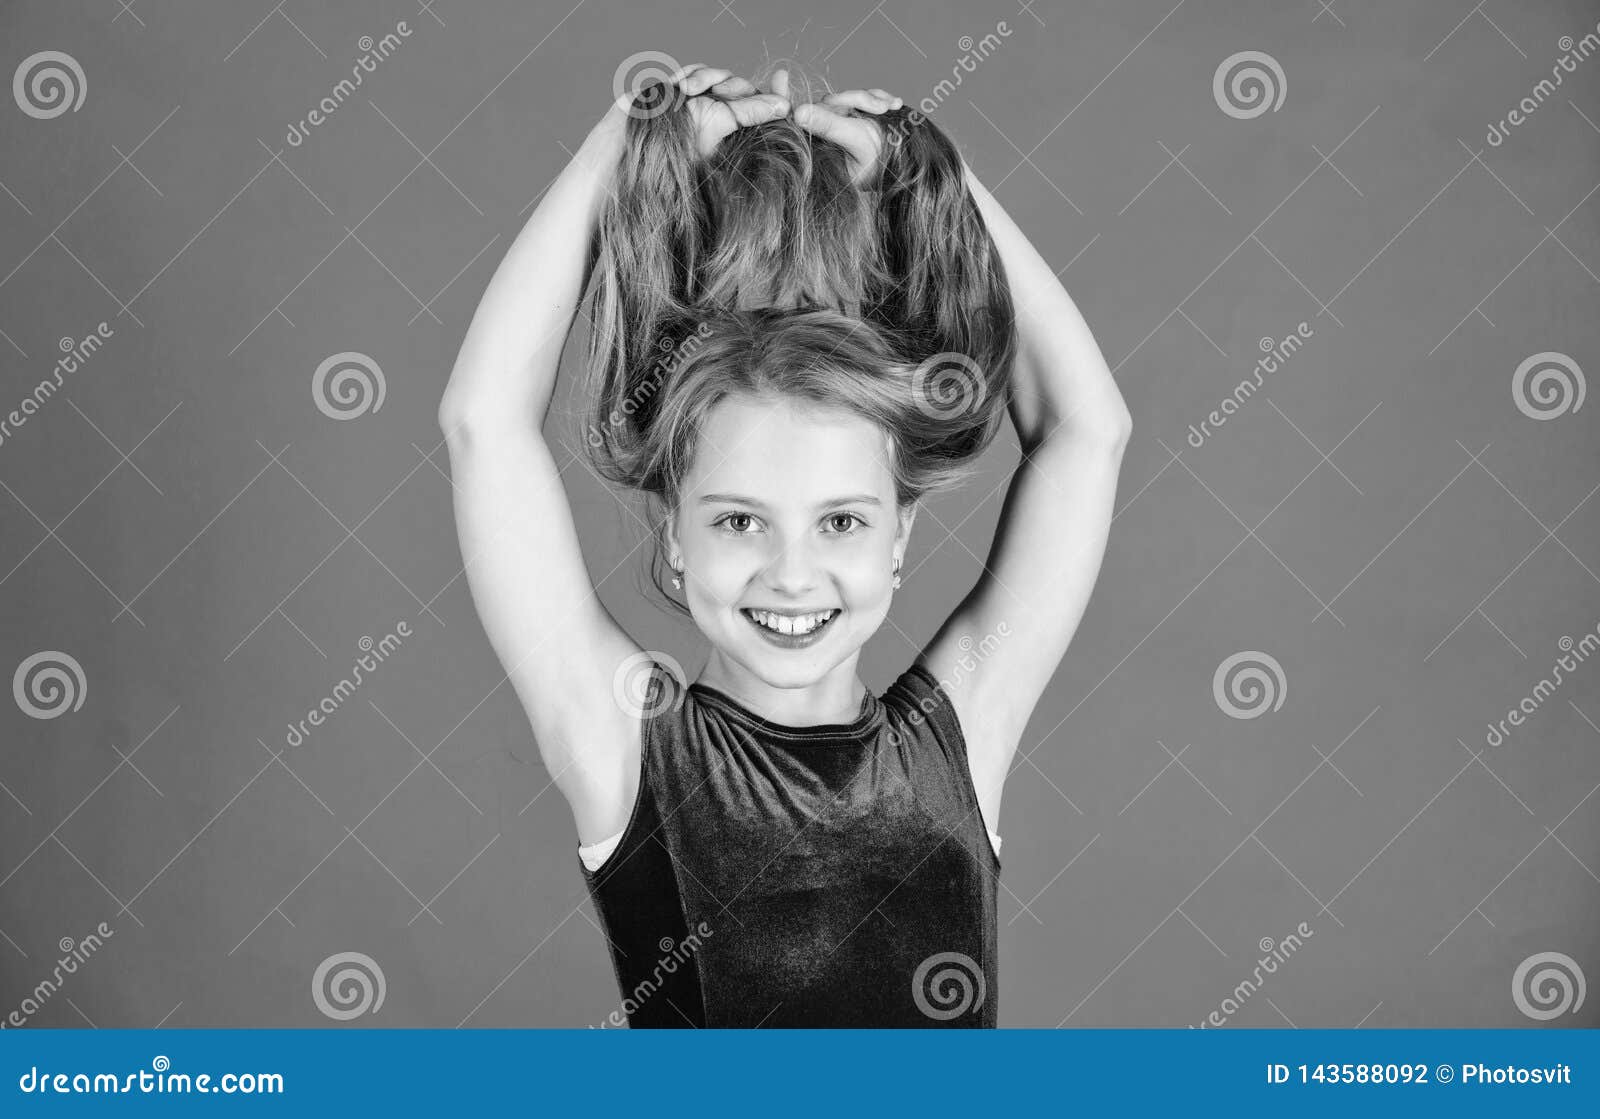 How To Make Tidy Hairstyle For Kid Ballroom Latin Dance